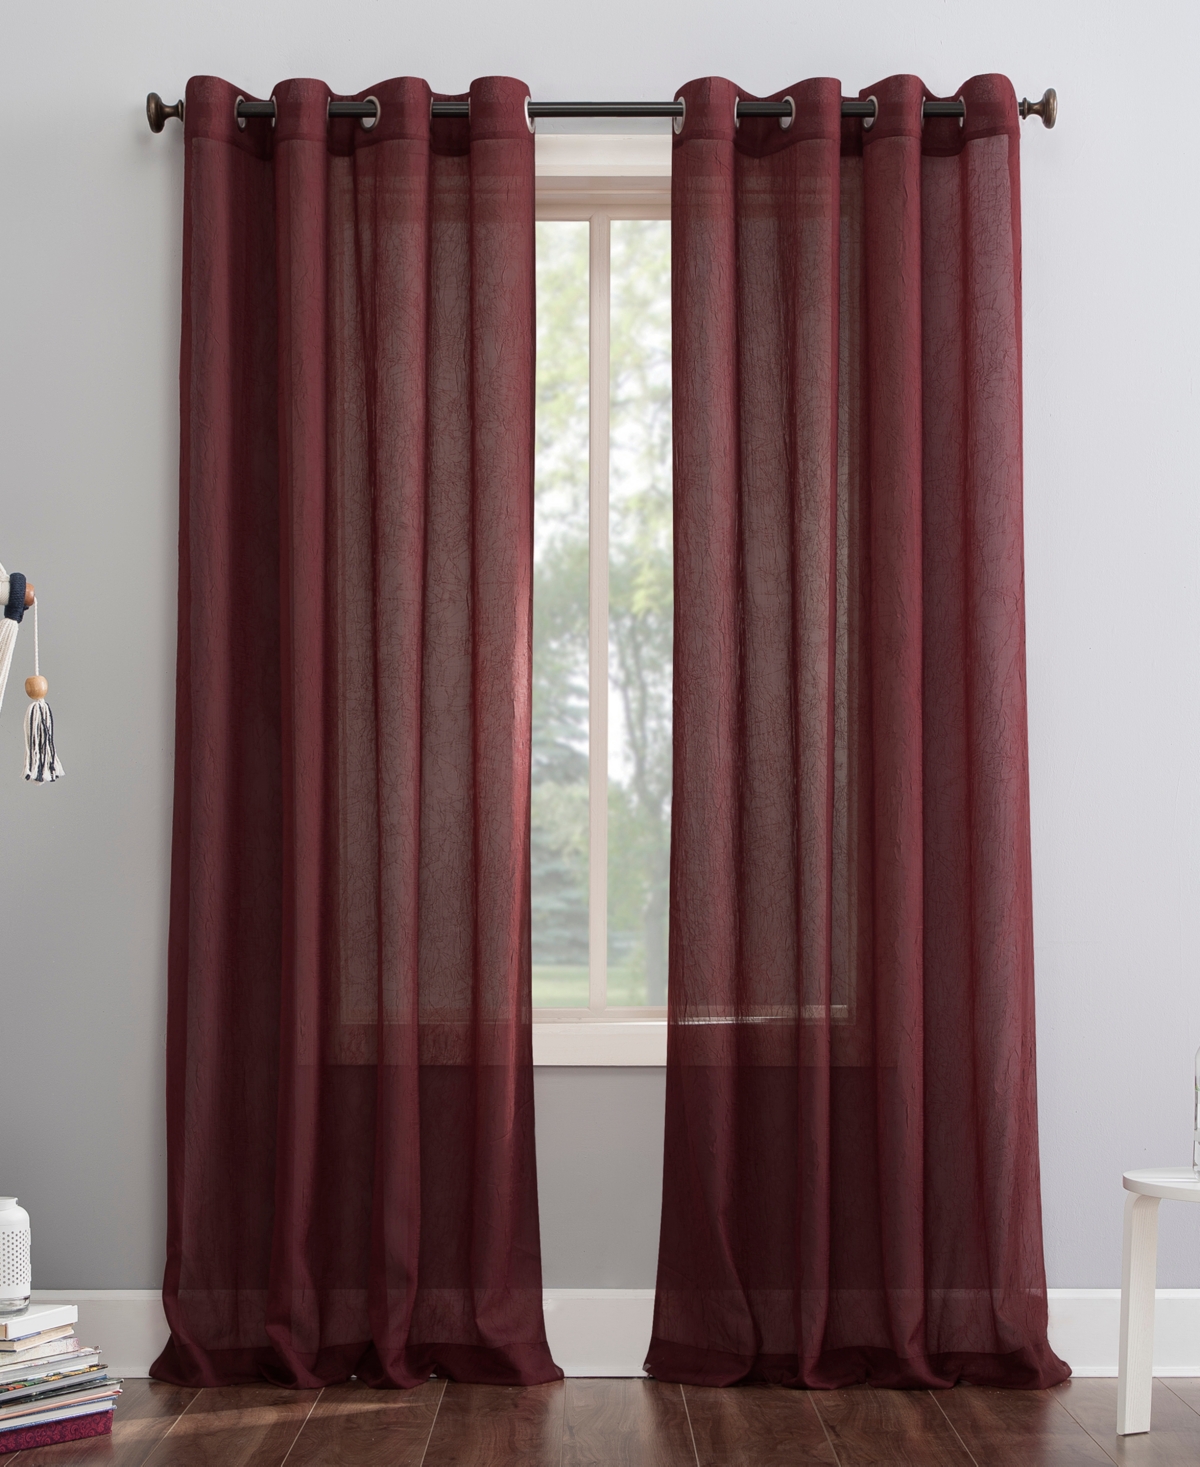 No. 918 Erica Crushed Voile Sheer Grommet Single Curtain Panel, 51" X 63" In Burgundy